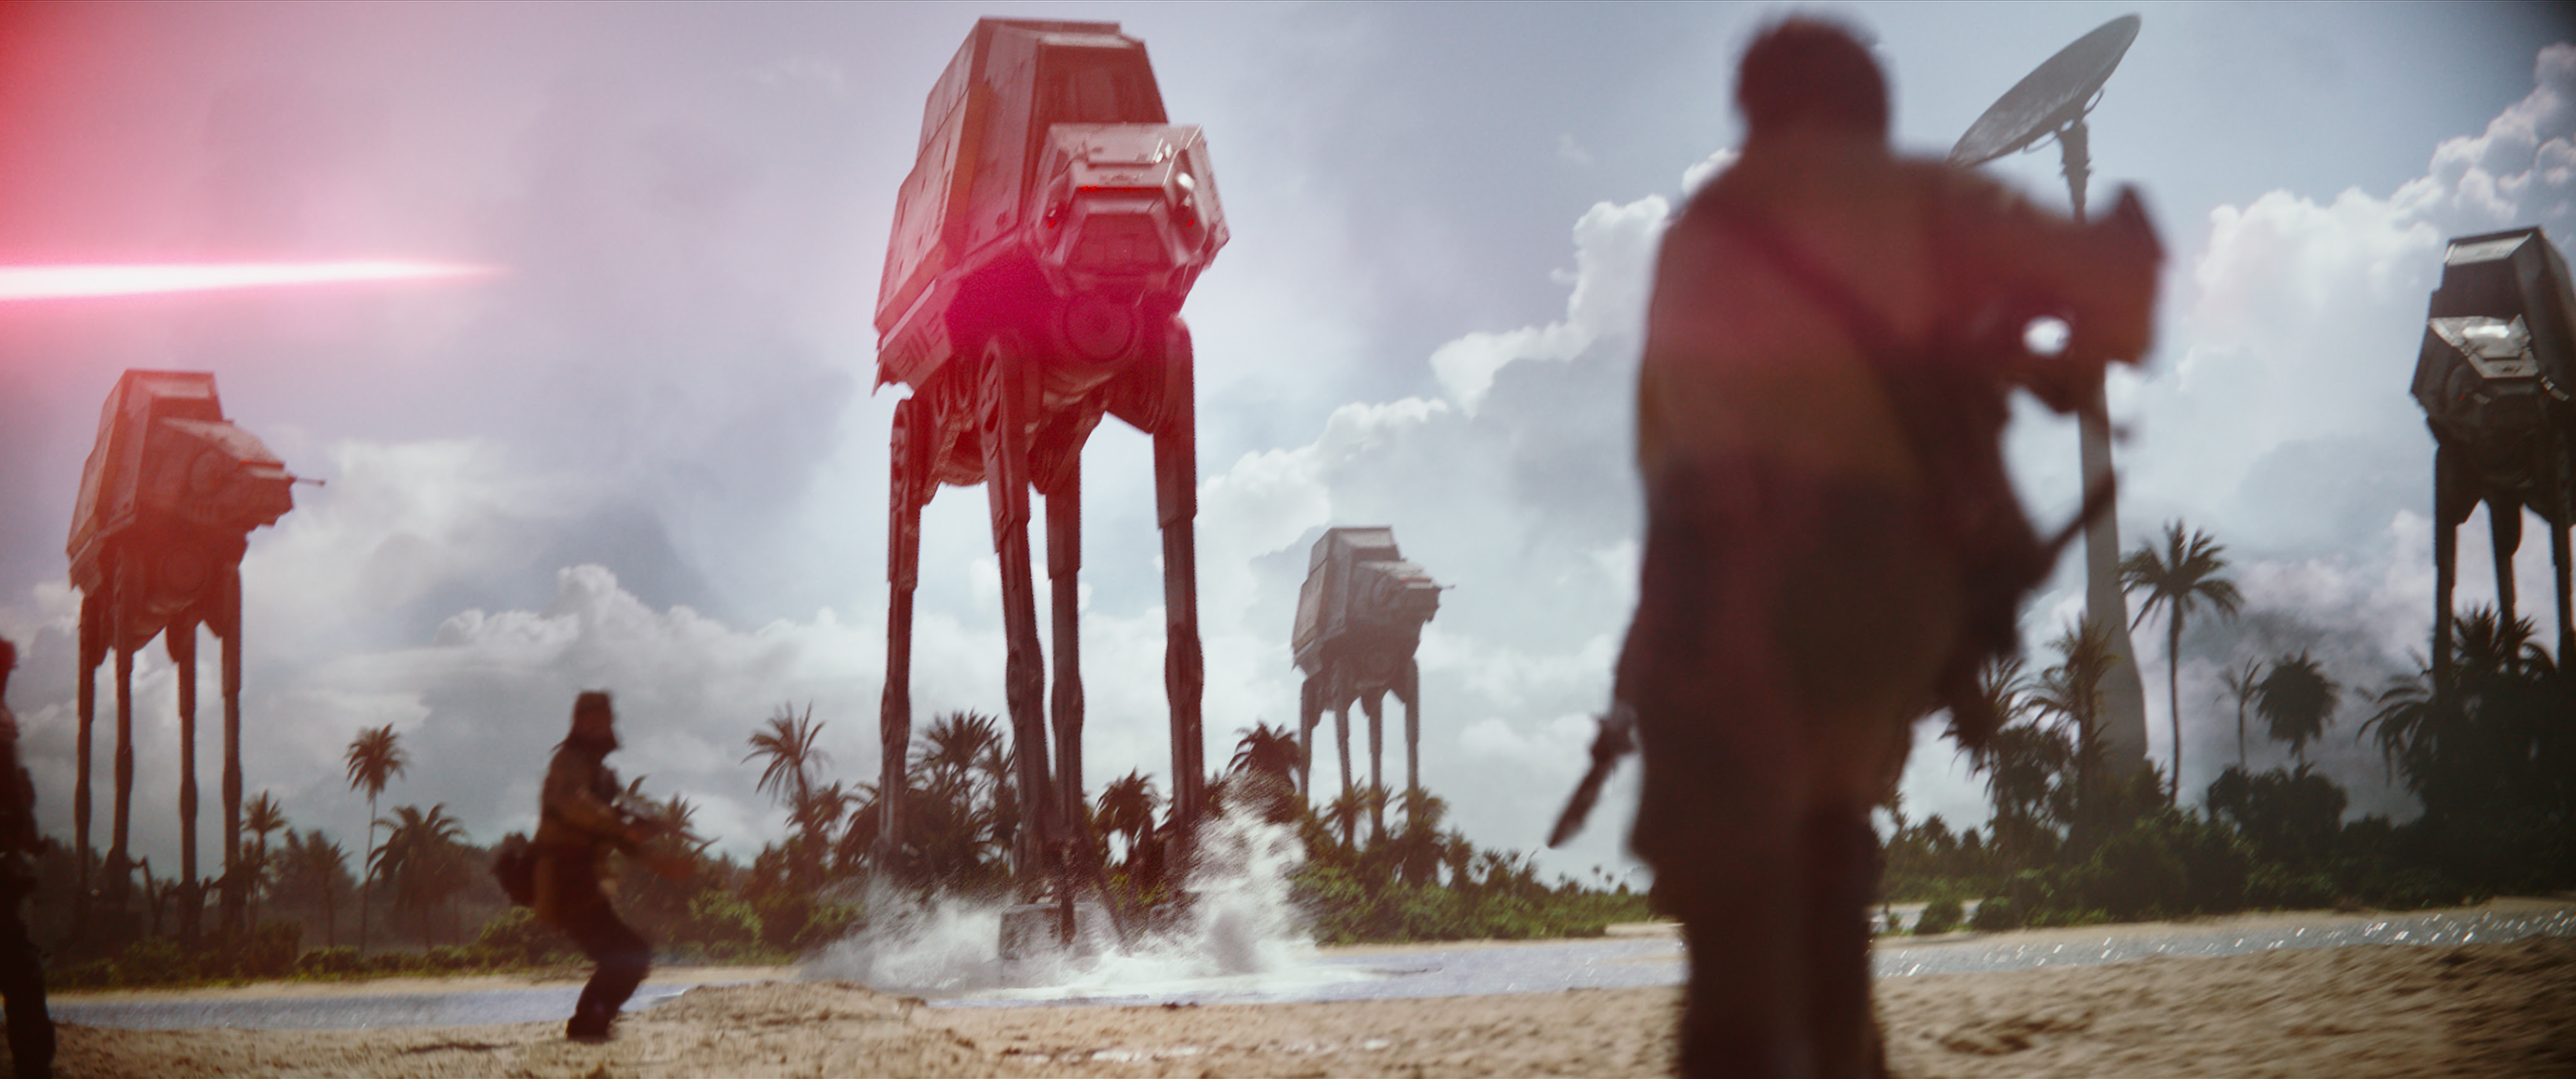 Rogue One: A Star Wars StoryPh: Film Frame©Lucasfilm LFL